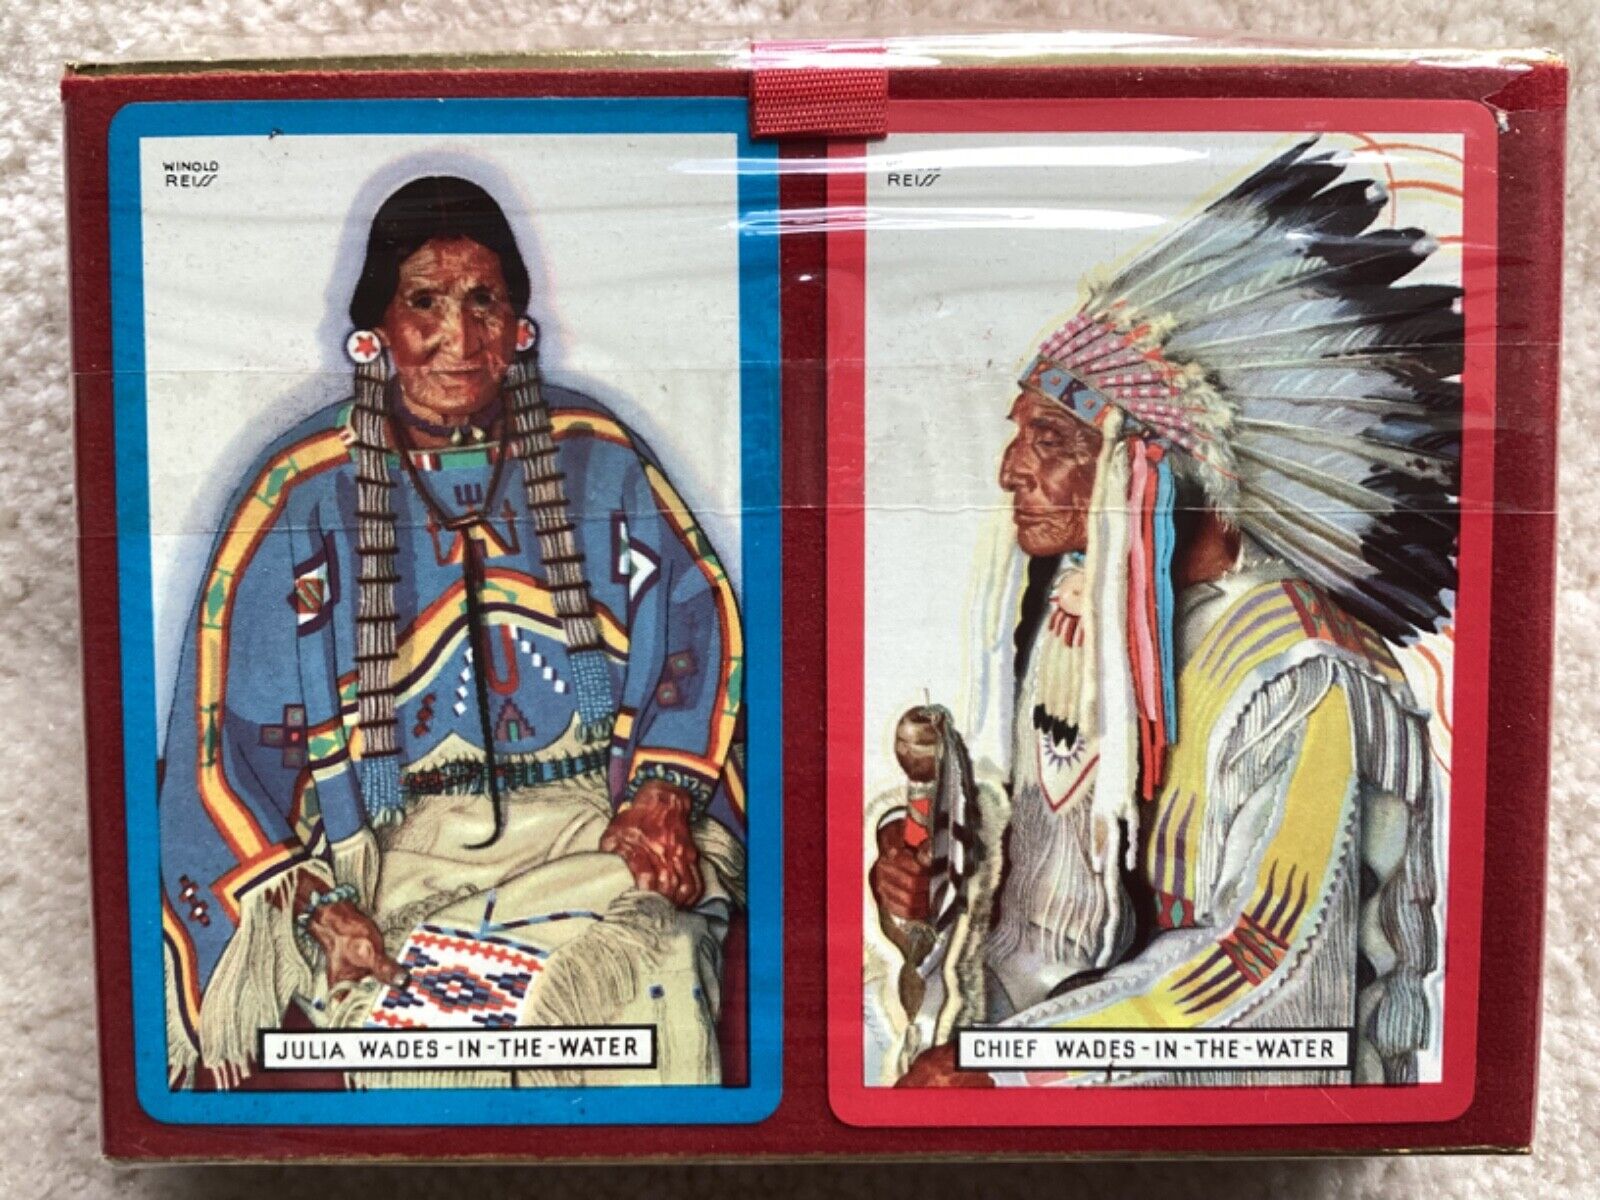 2 Sets Unopened Great Northern Railway Playing Cards, Native American Art, Reiss